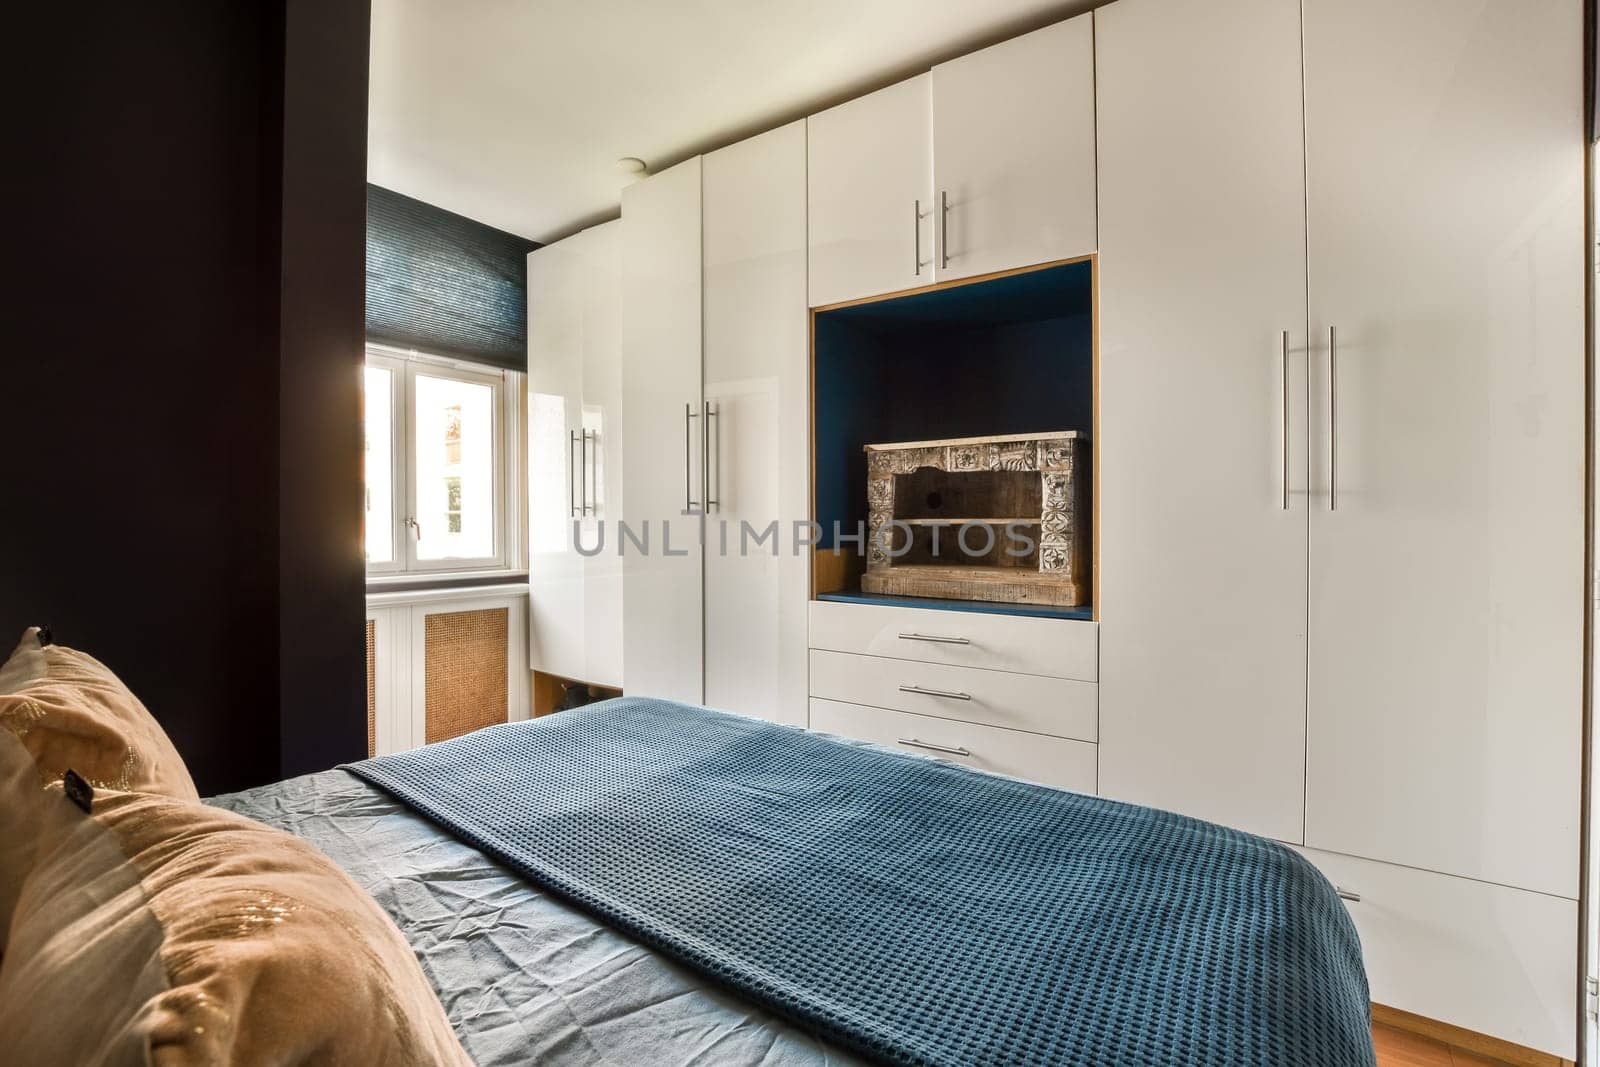 a bedroom with white cupboards and blue blanket on the bed, in front of a wall mounted flat screen